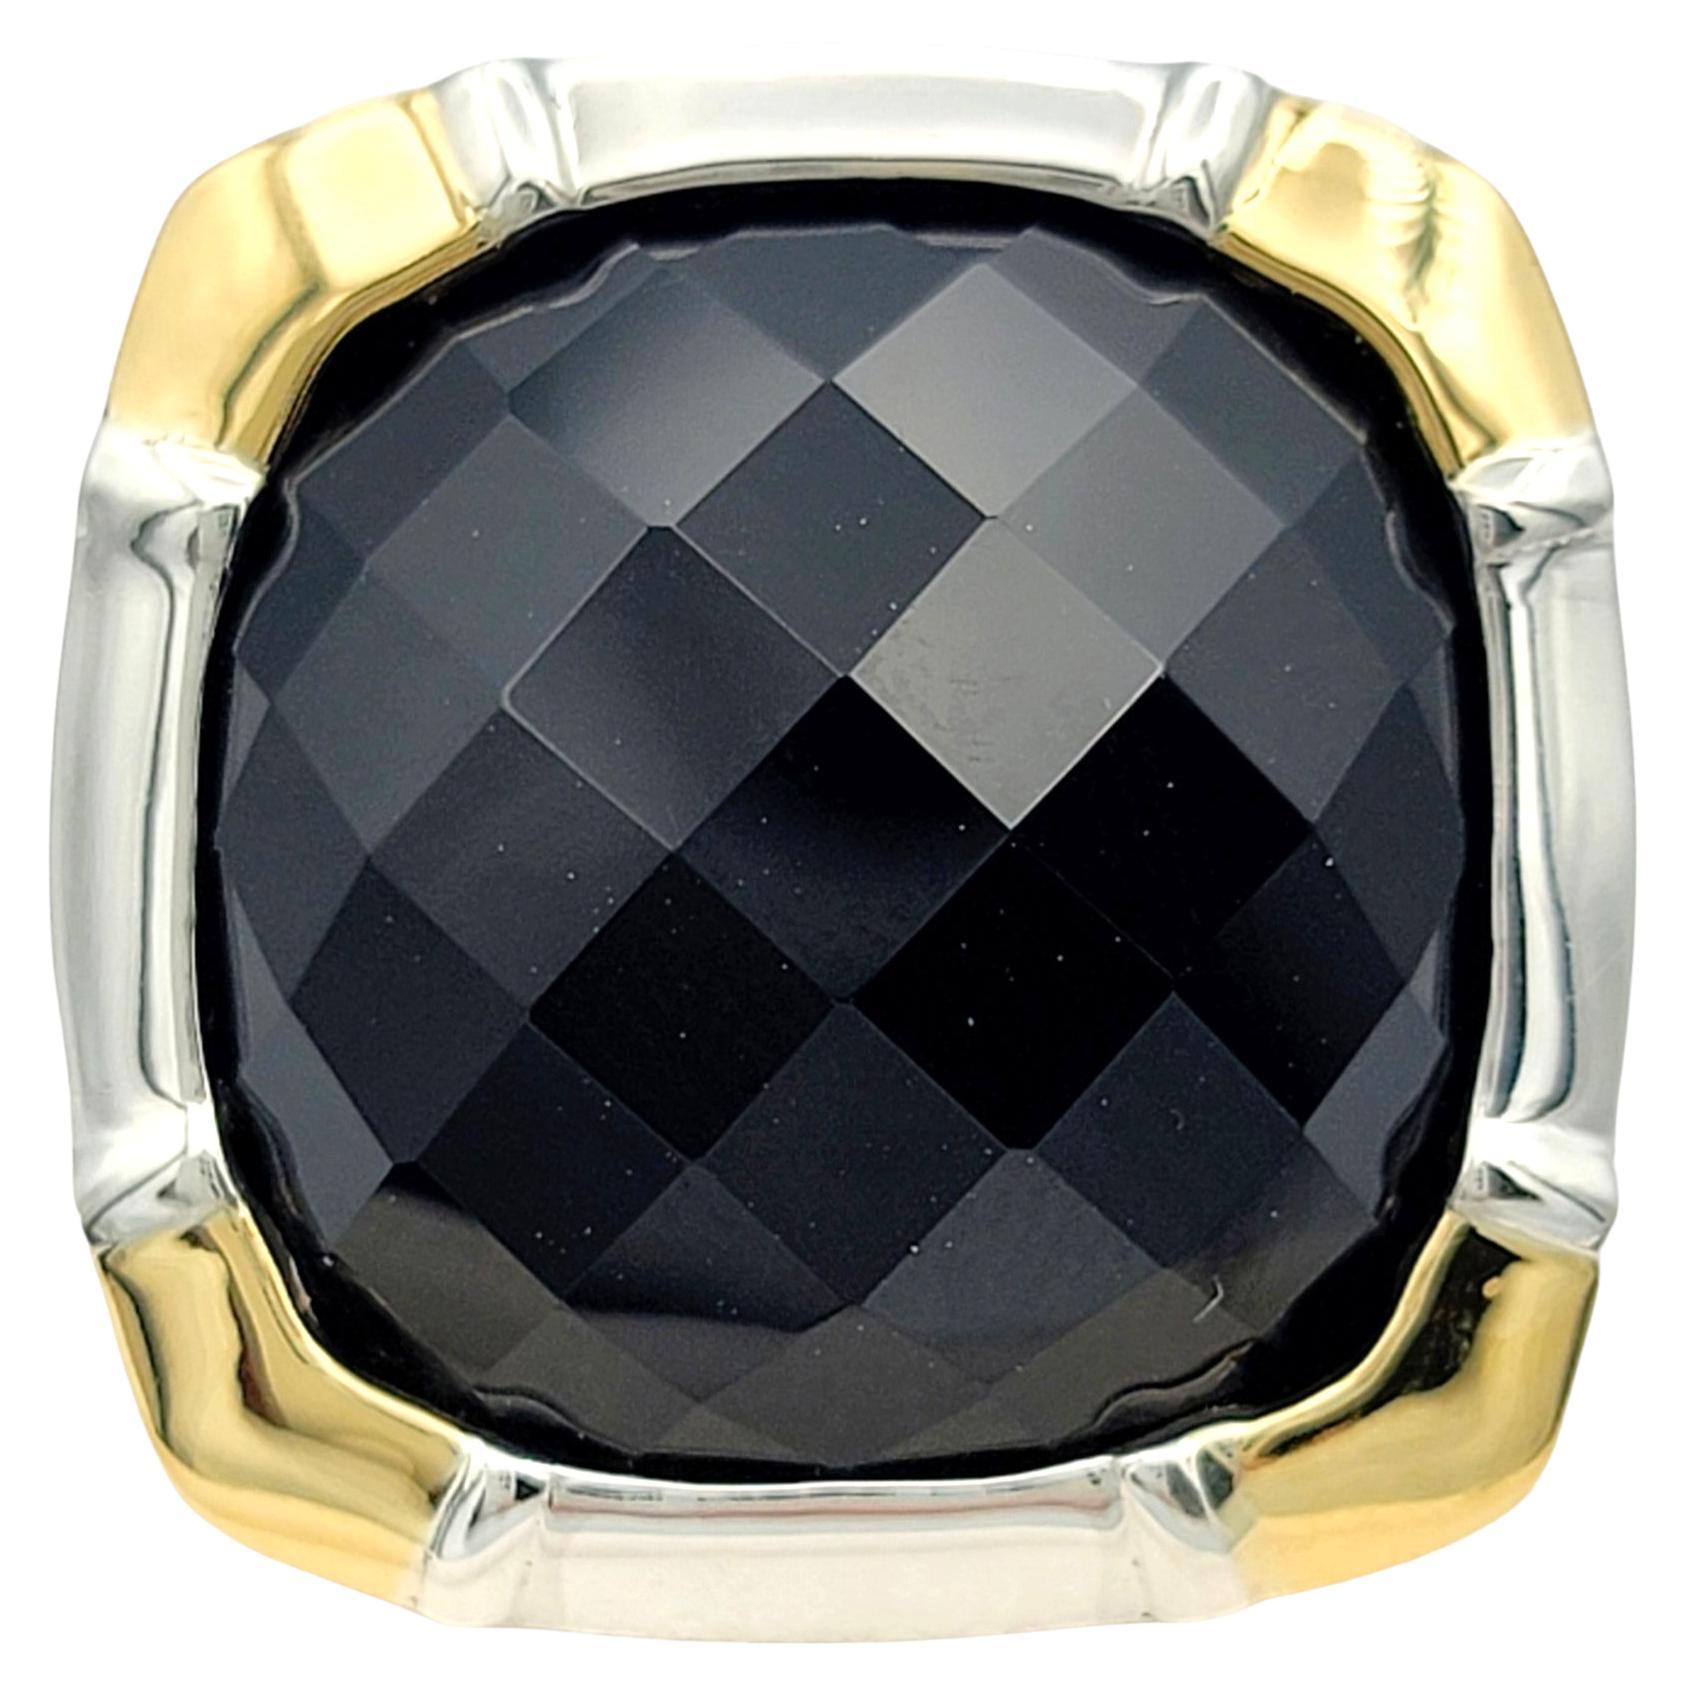 Ring Size: 8

This beautiful Lorenzo black onyx ring exudes a bold and sophisticated charm, combining the rich allure of onyx with the timeless elegance of 18 karat yellow gold and sterling silver. At its heart lies a square checkerboard cushion